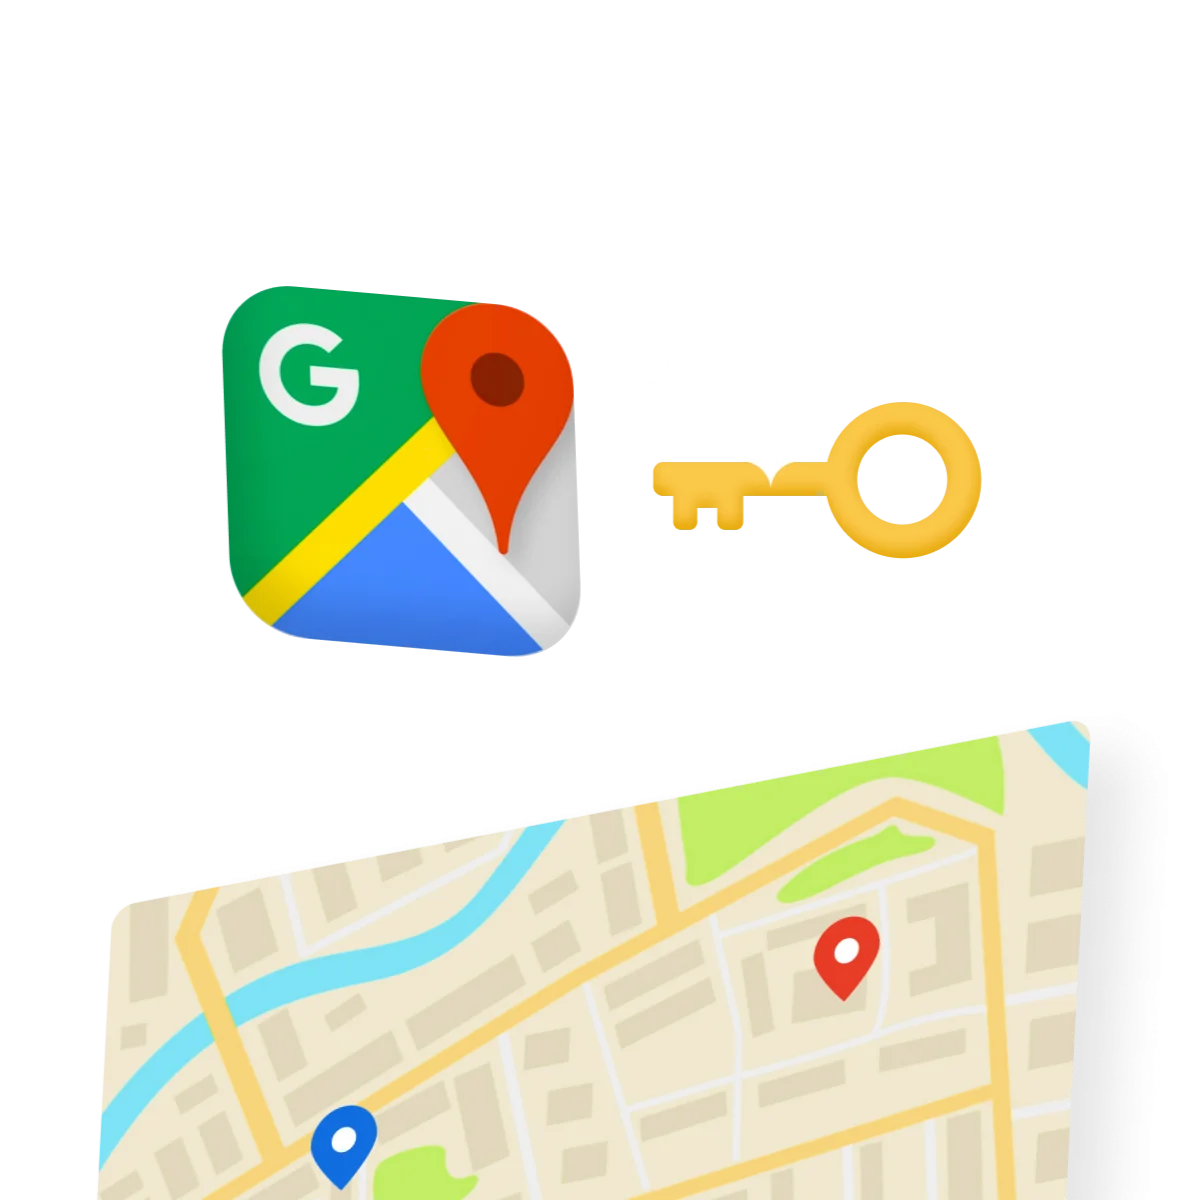 How to get Google Maps Api Key in 1 minute